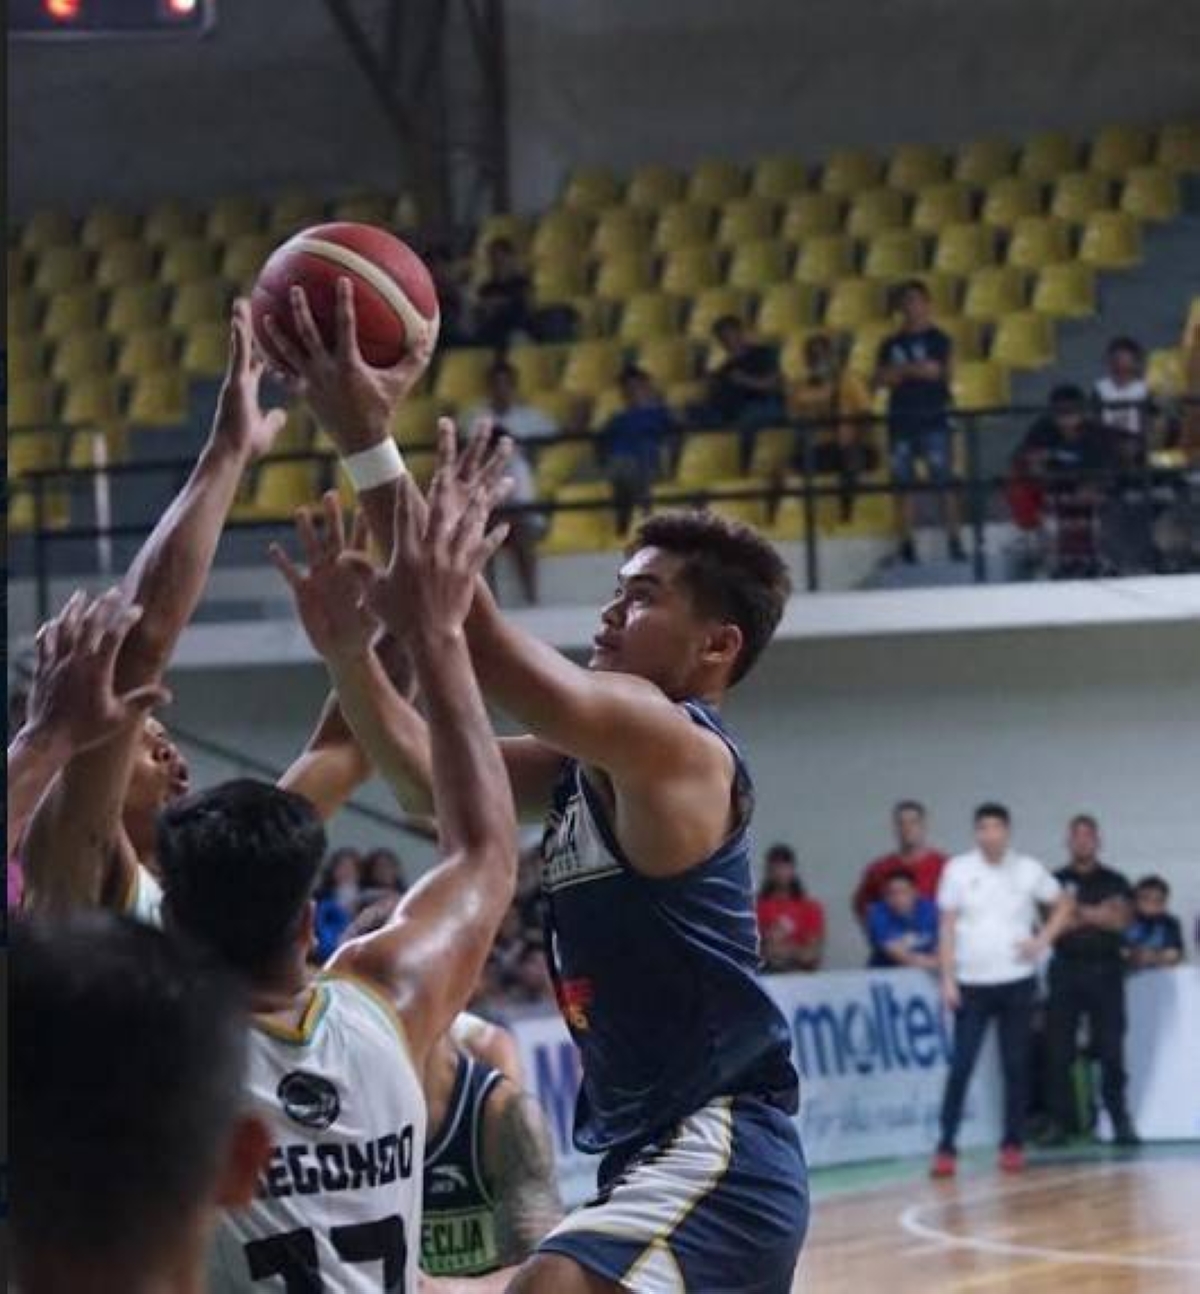 Sherwin Concepcion of Nueva Ecija attacks the defense of Negros in the MPBL on Friday at the Baliwag Star Arena in Bulacan. MPBL PHOTO